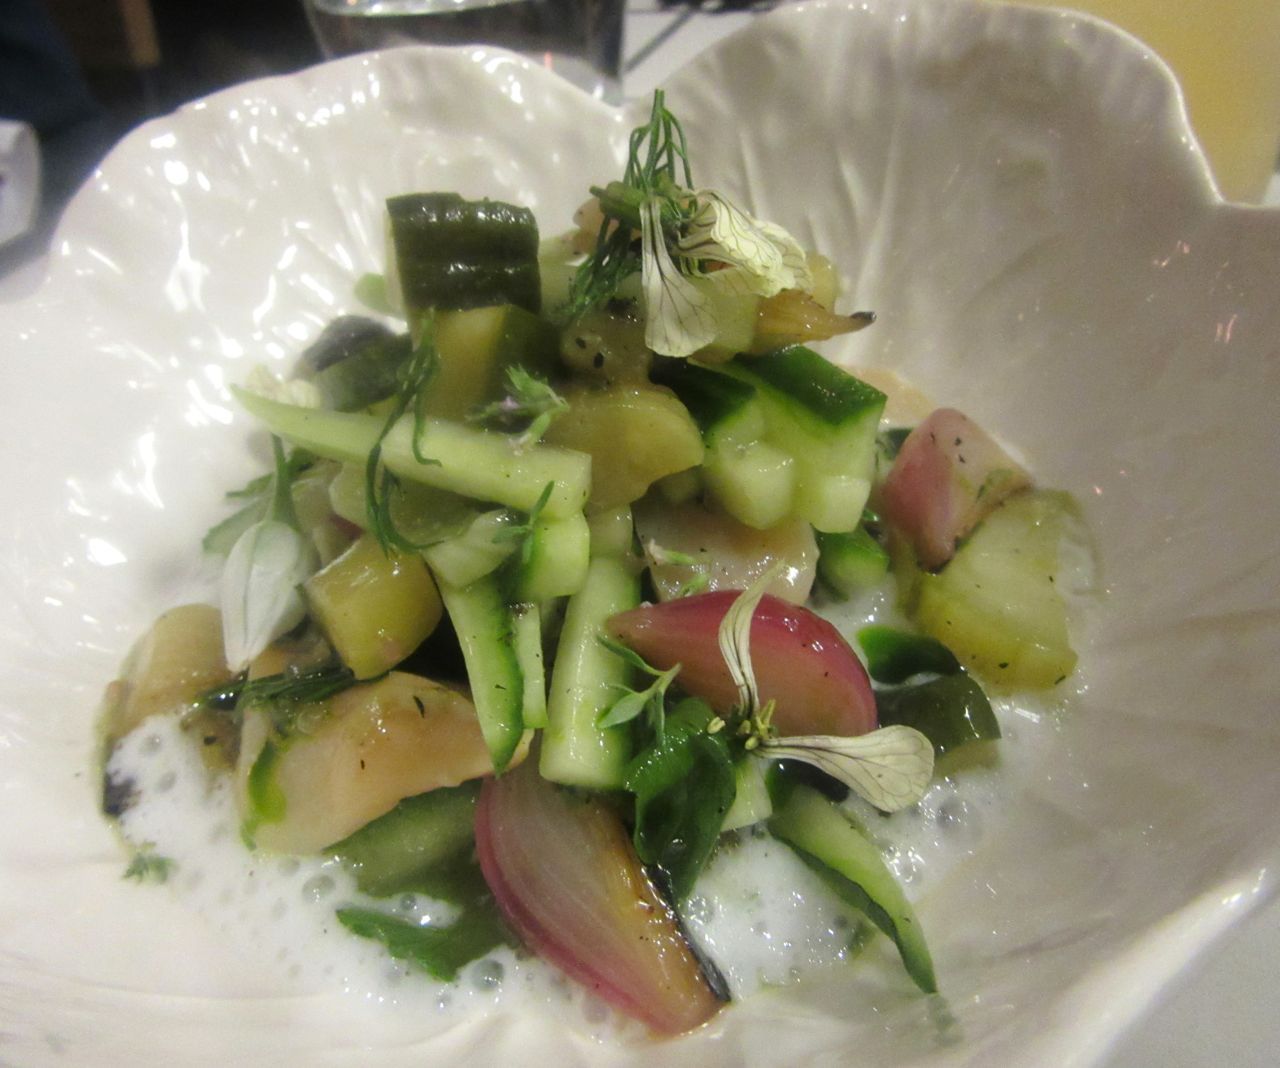 Use the dense Portuguese bread to mop up the charred cucumber and razor clam salad.